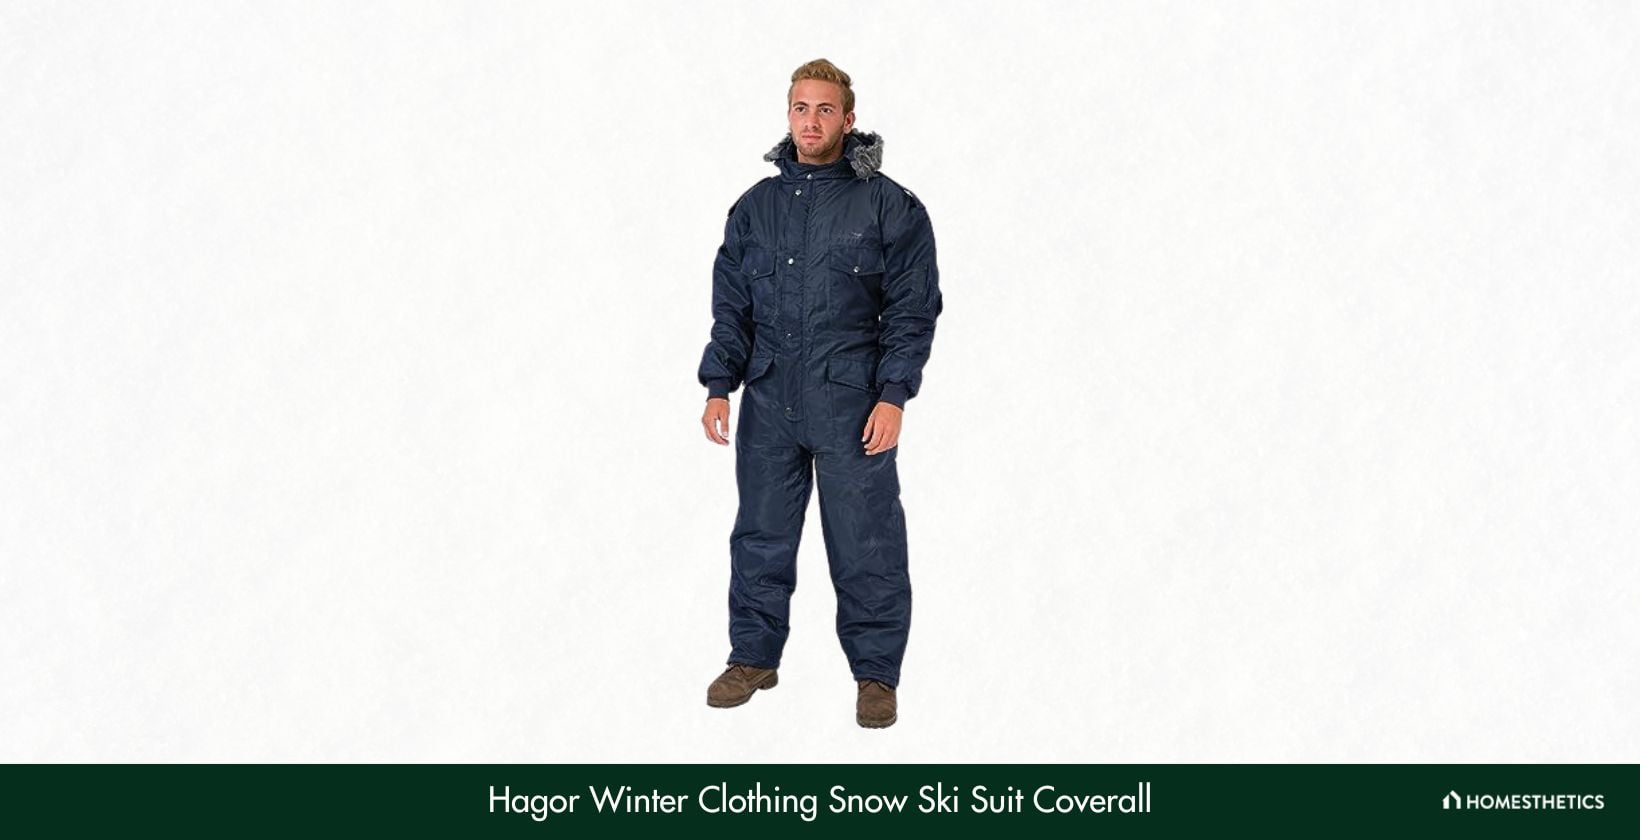 Hagor Winter Clothing Snow Ski Suit Coverall 2